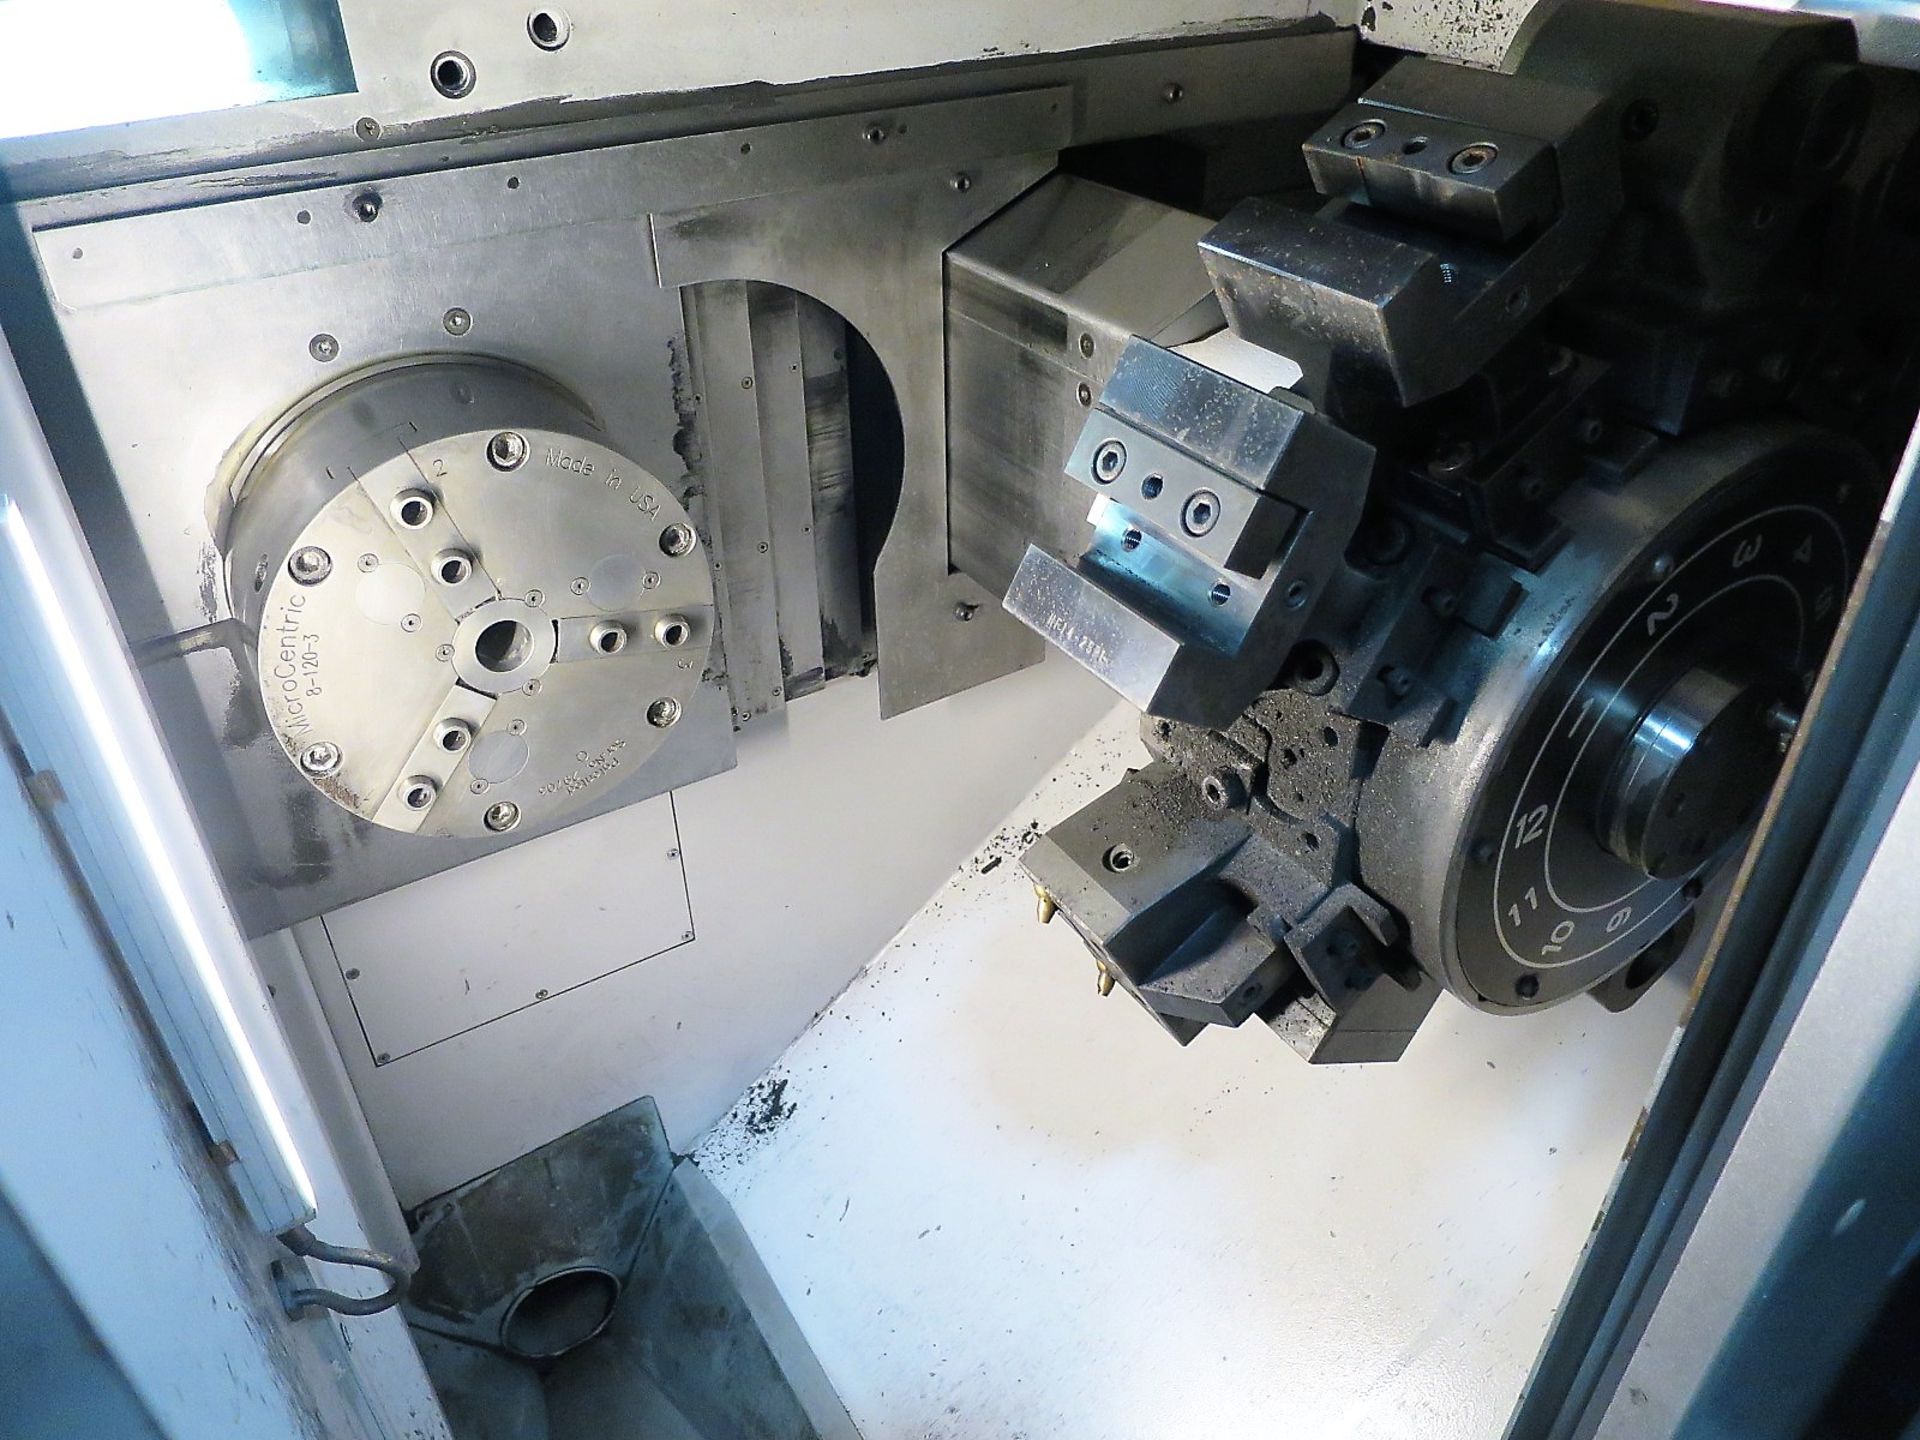 Okuma 2SP-150HM Twin Spindle 3-Axis Turning Center w/Live Milling, S/N 156690, New 2011 - Image 5 of 12